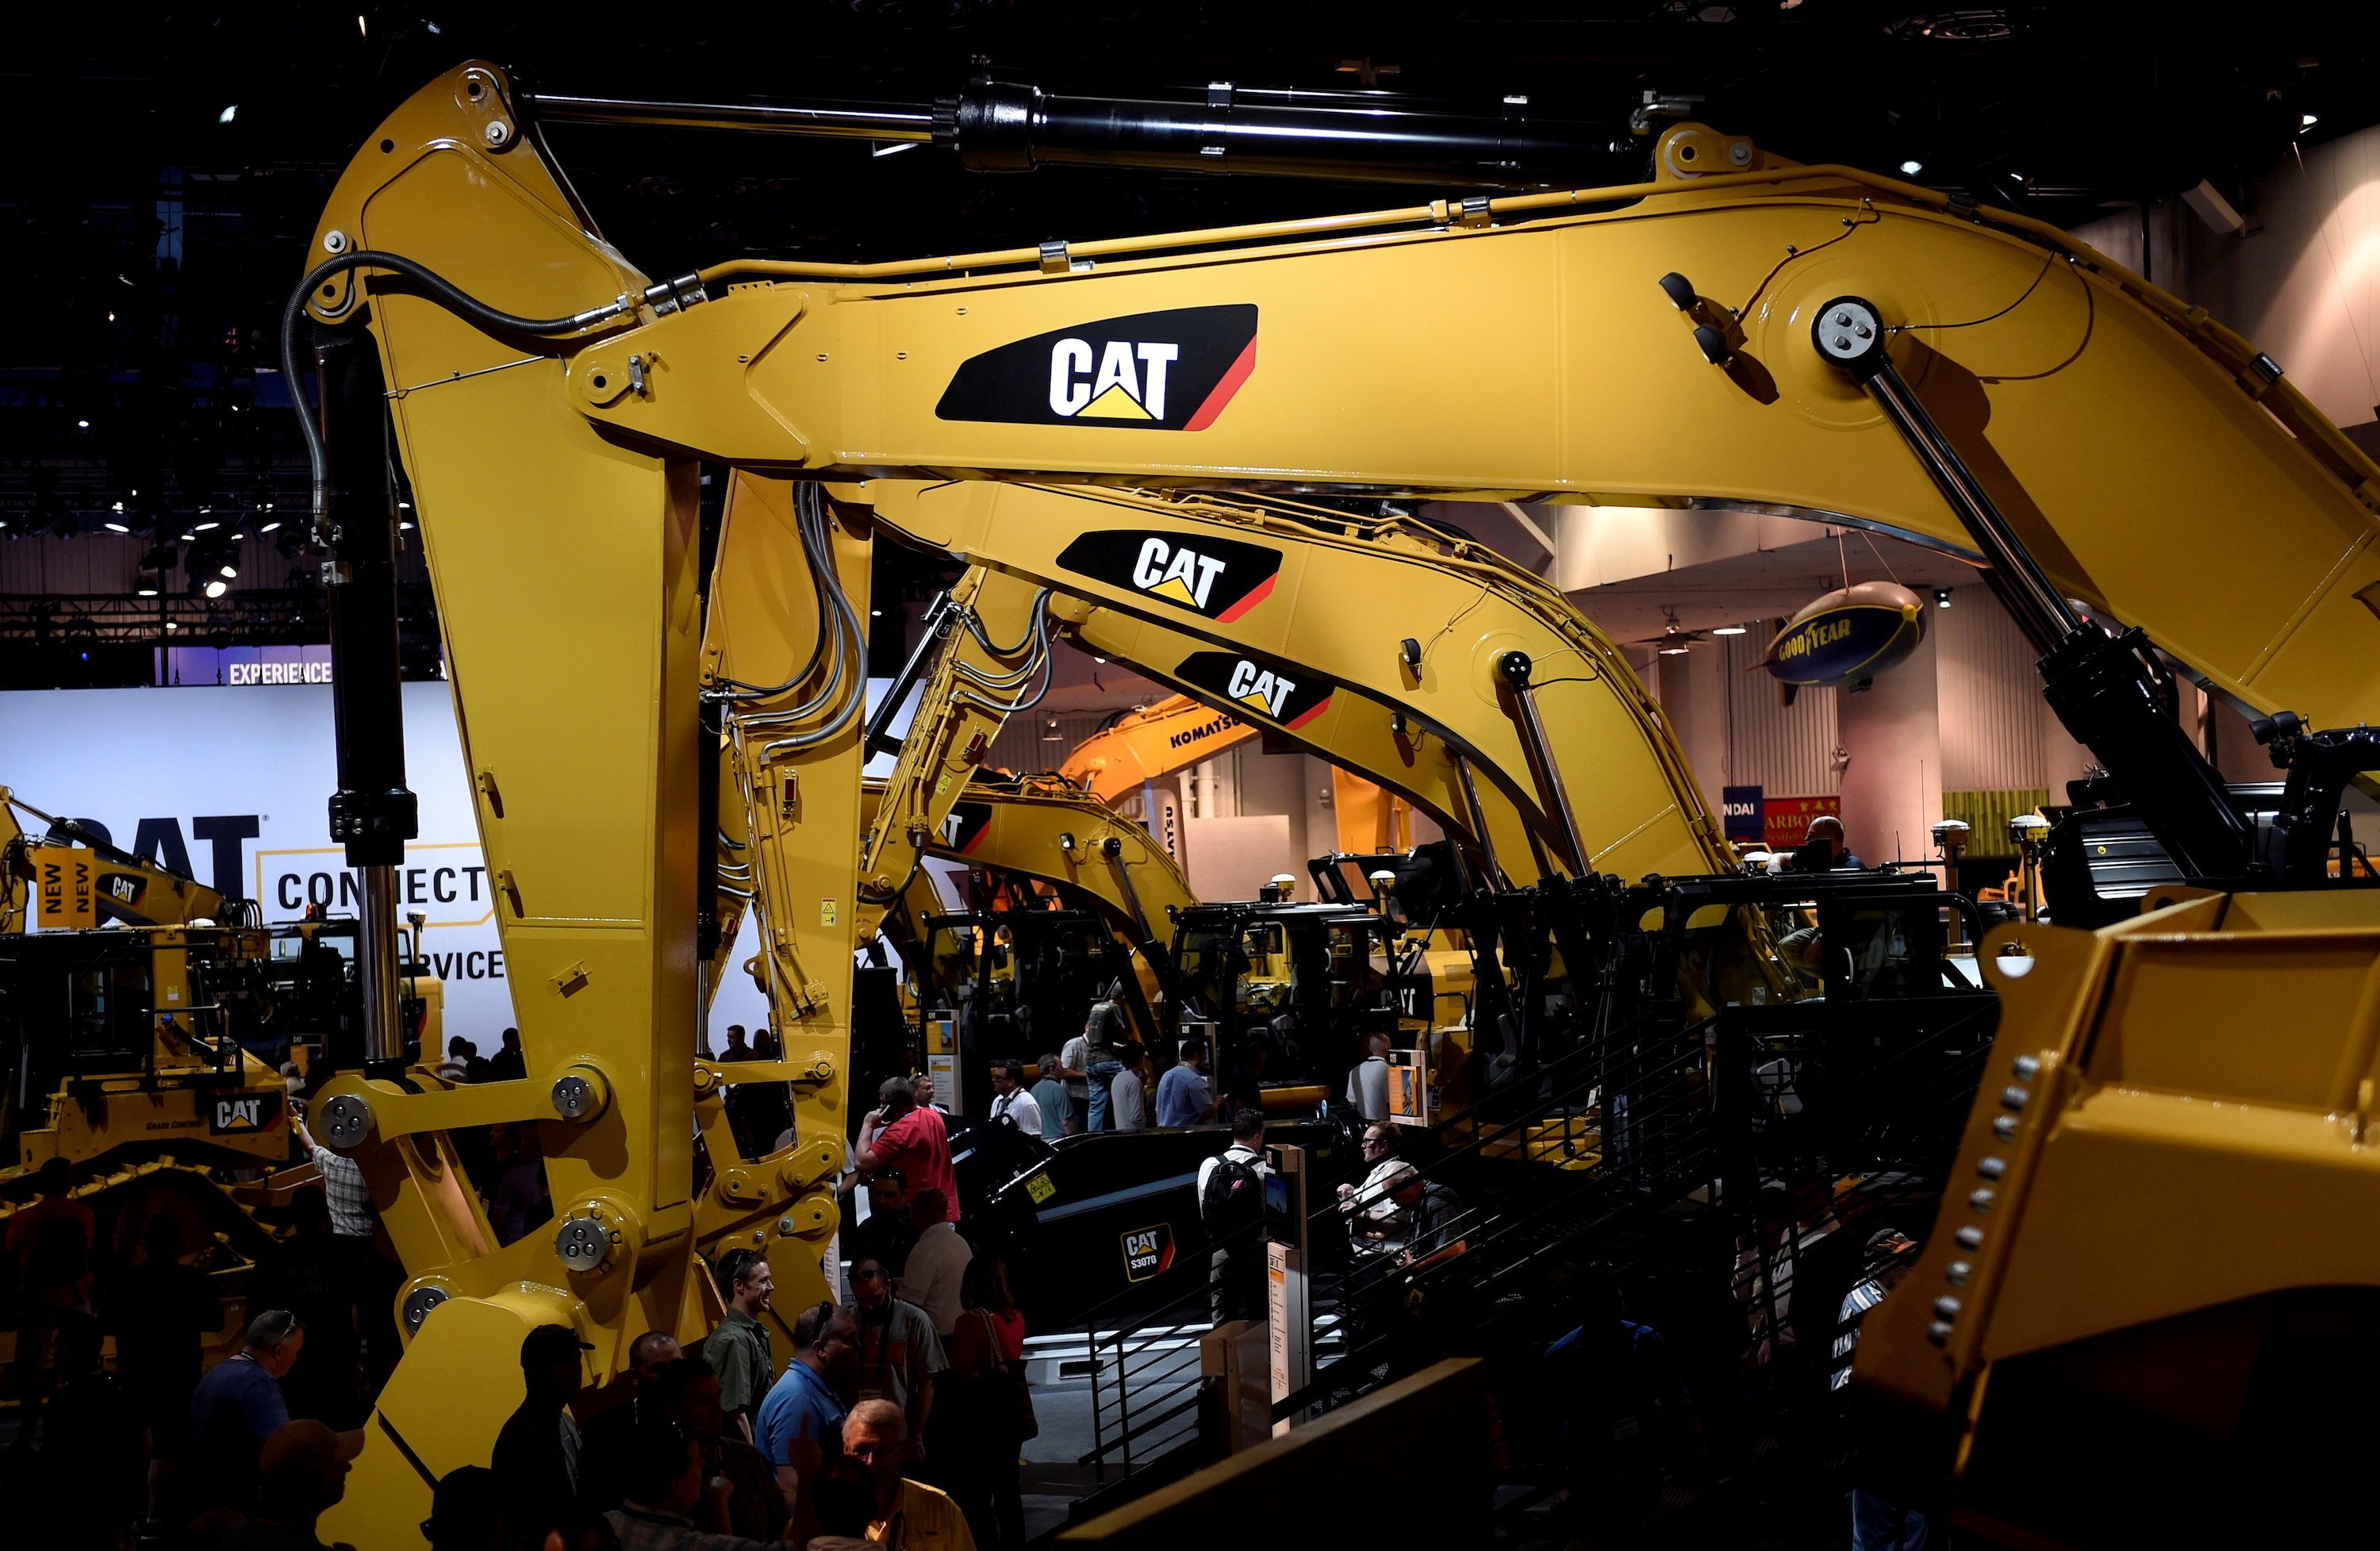 Caterpillar may hike prices further, experiencing production delays